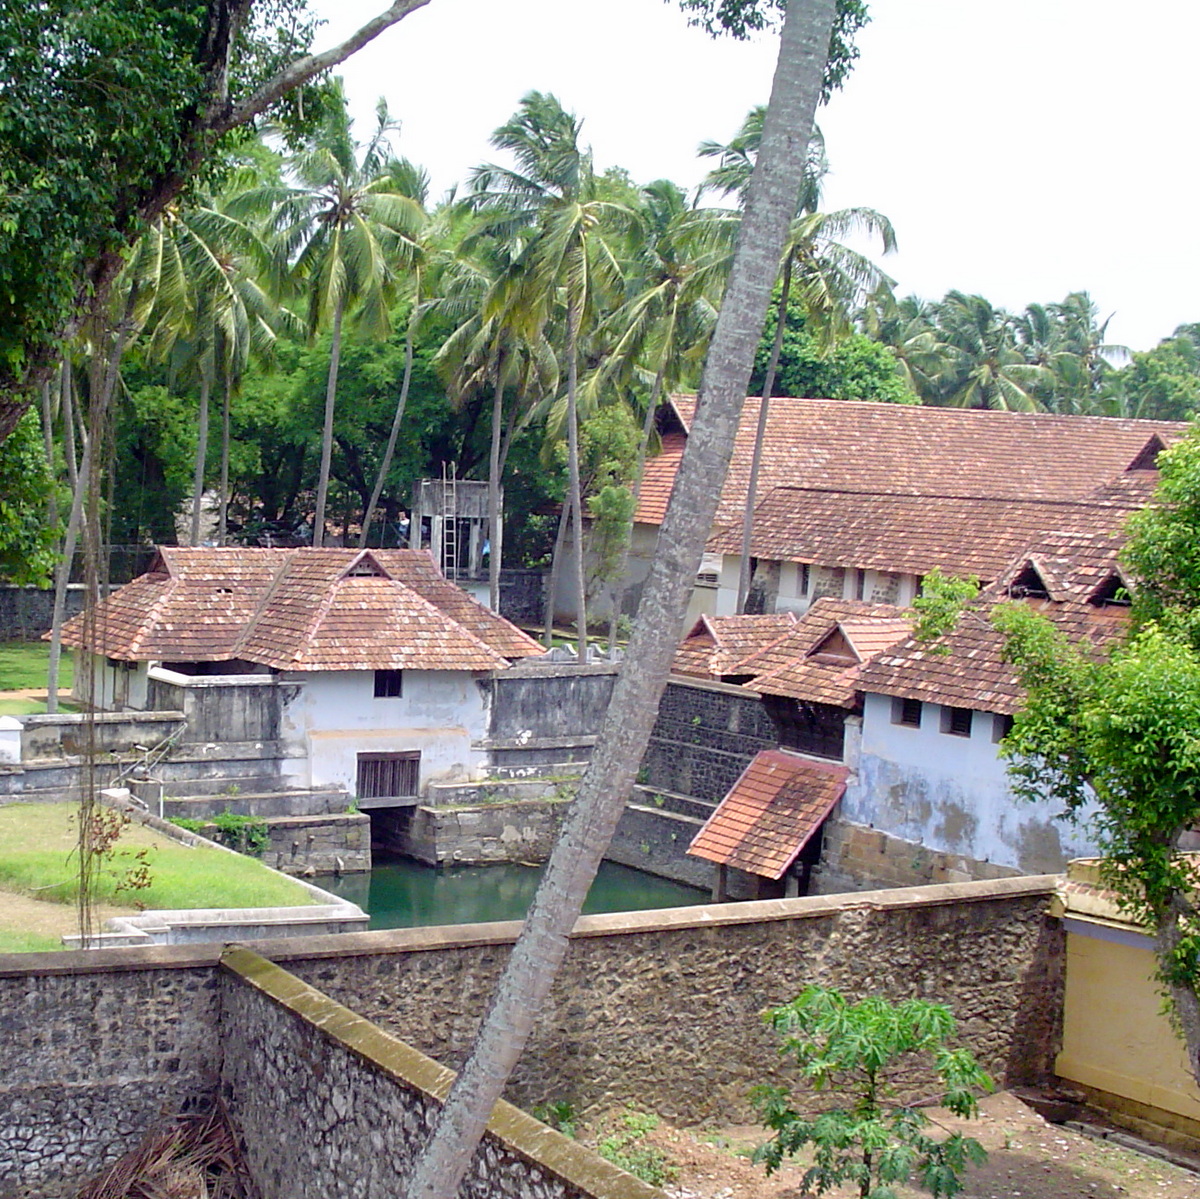 Padmanabhapuram Palace is now a museum, a fine specimen of the Kerala style architecture.